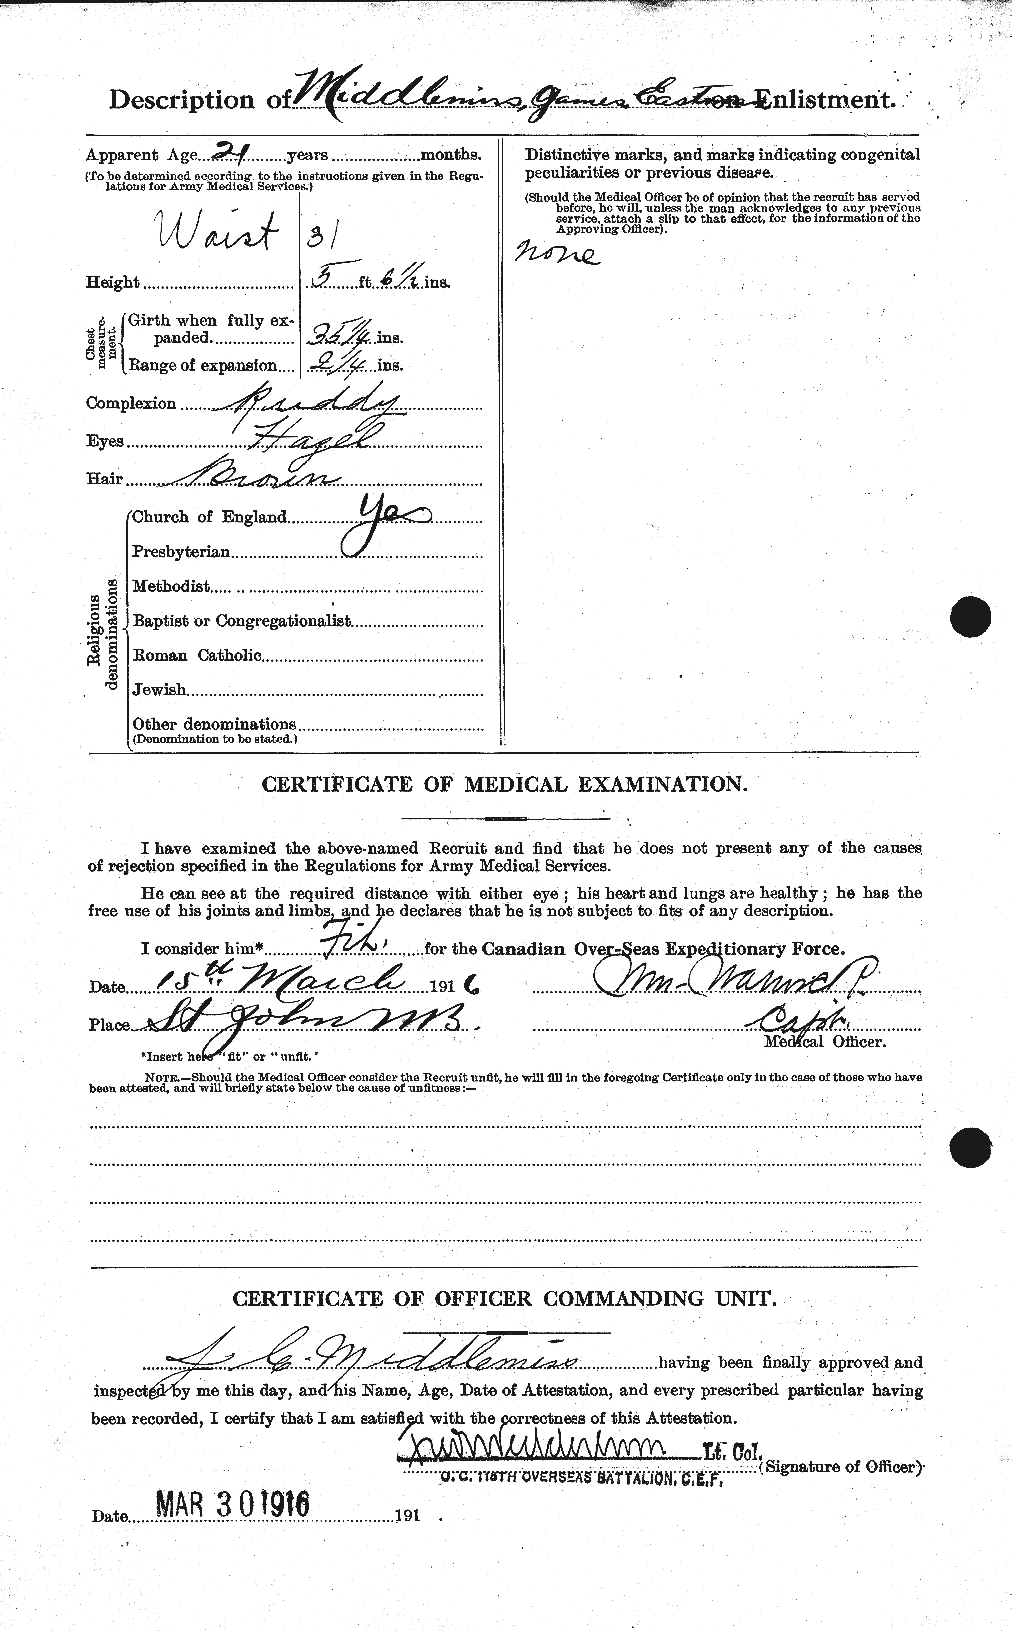 Personnel Records of the First World War - CEF 493007b